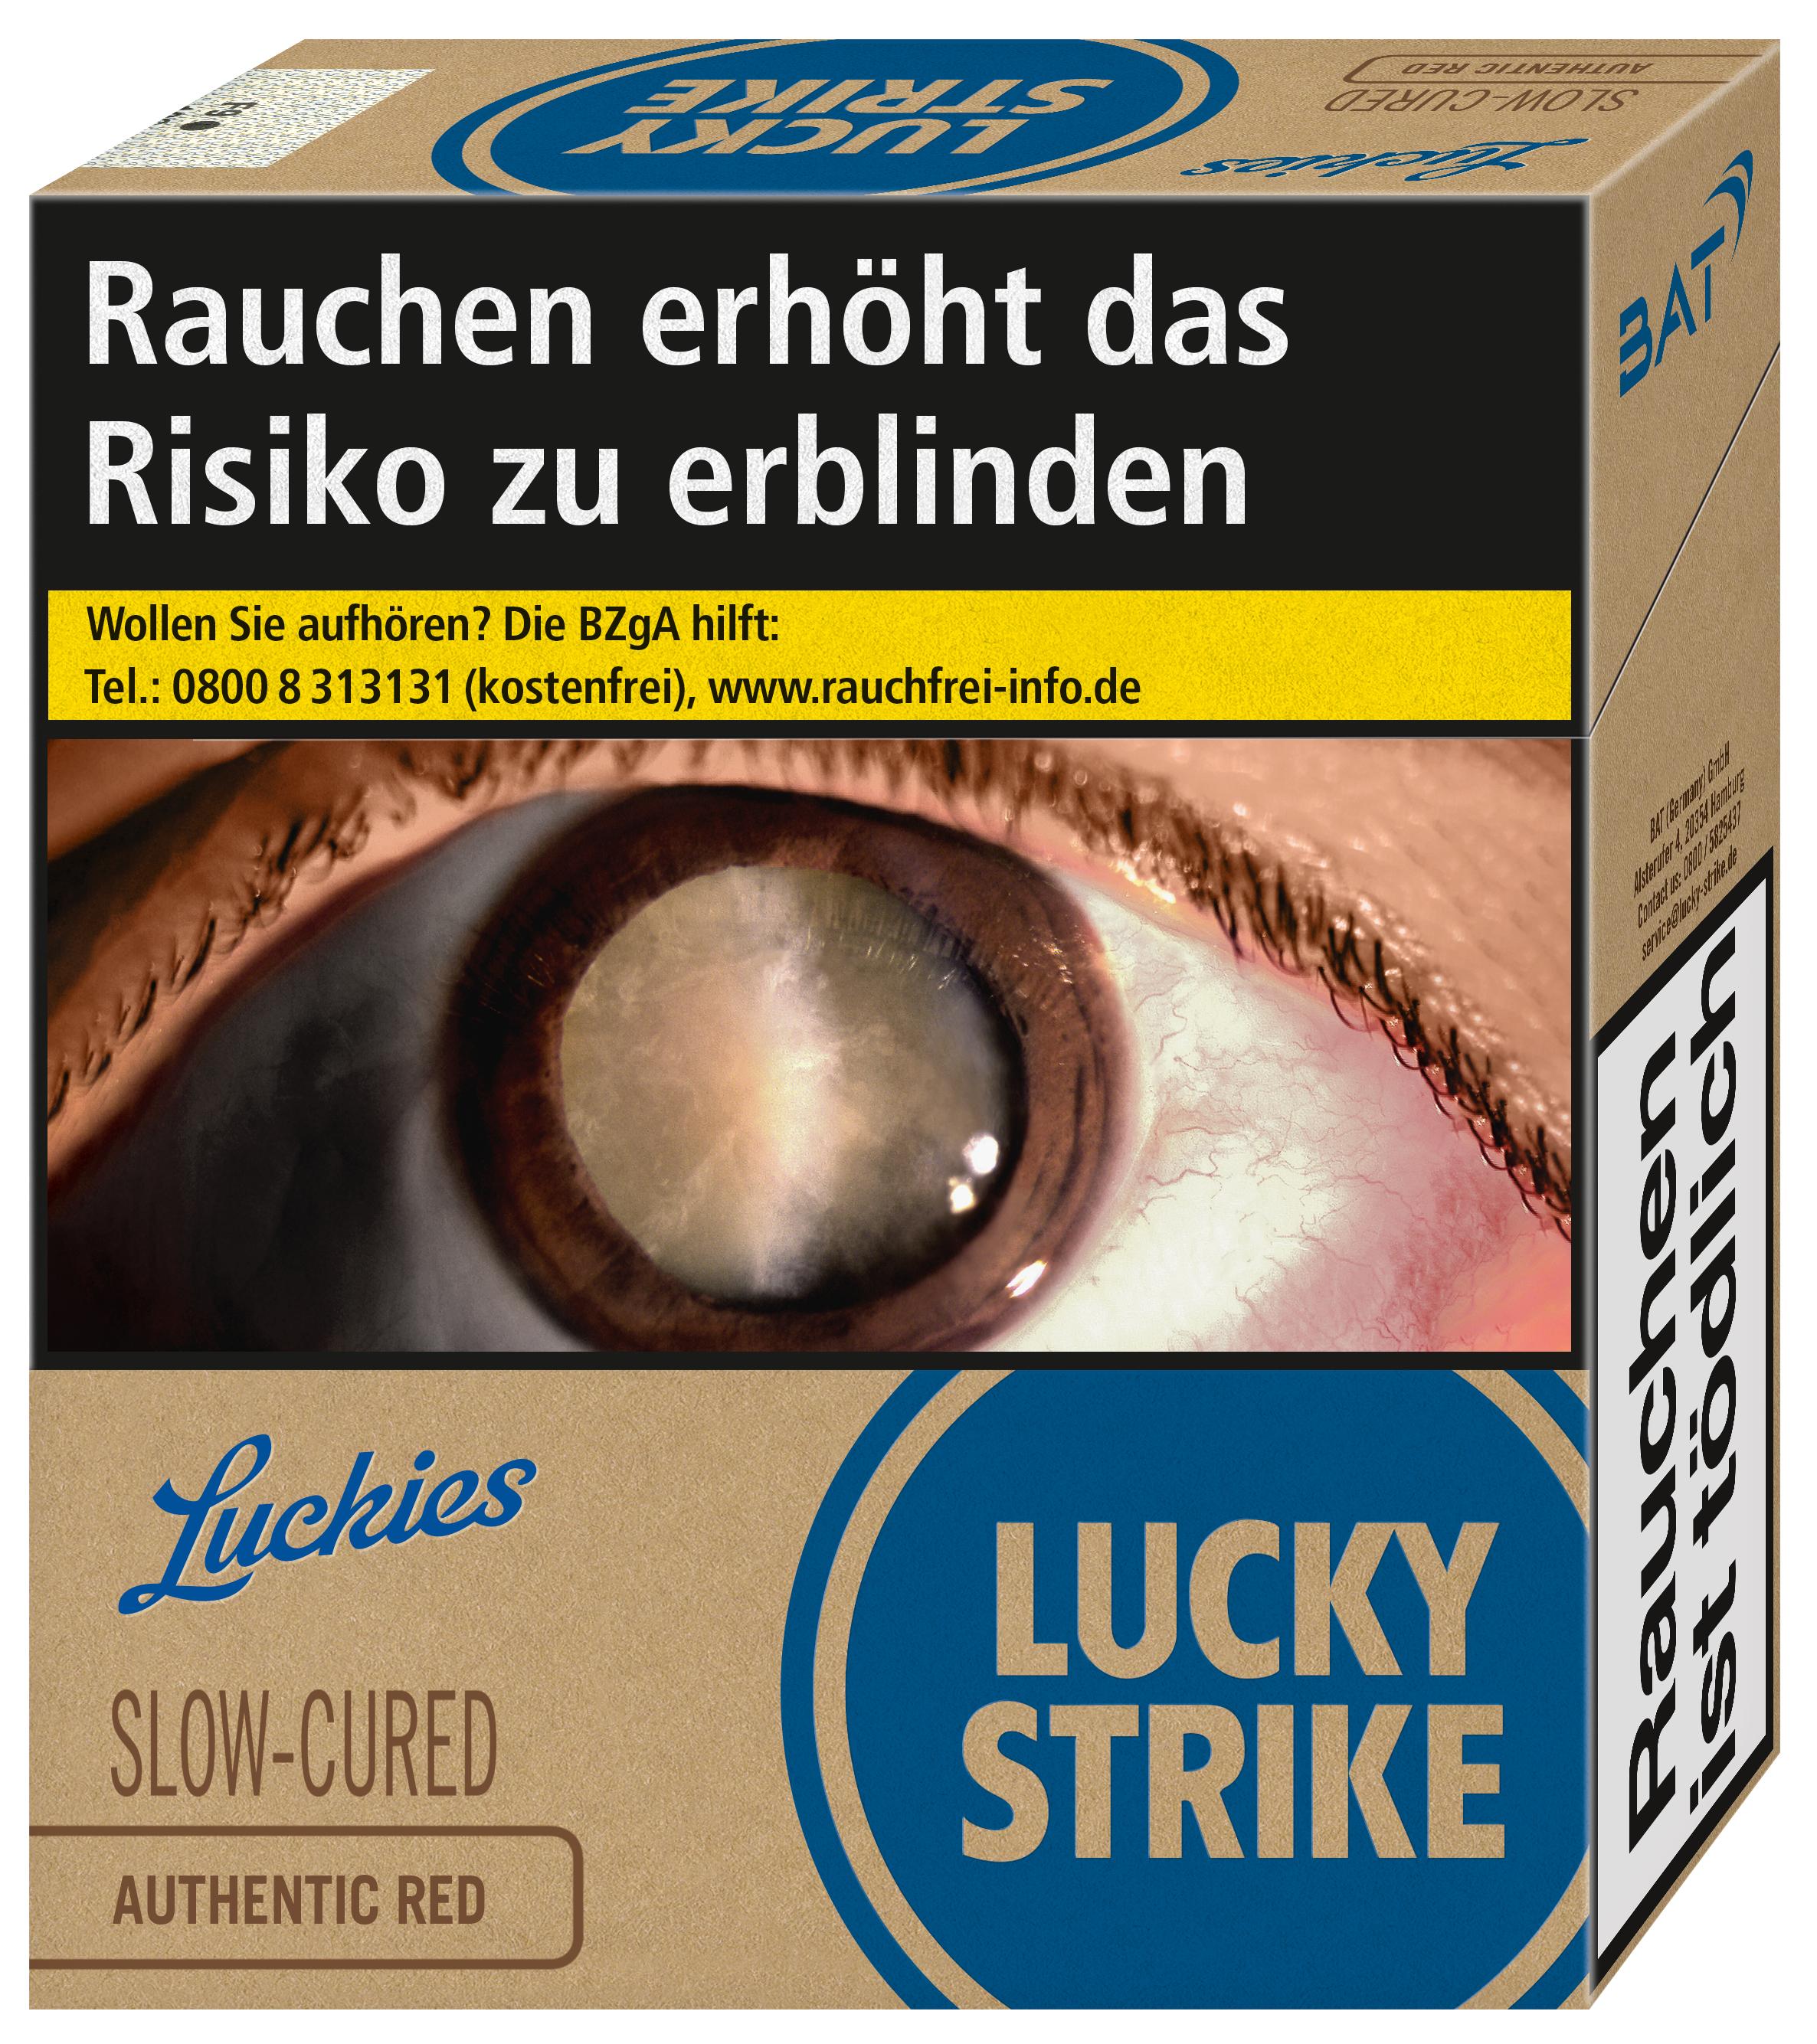 Lucky Strike Authentic Blue Zigaretten 1 Packung